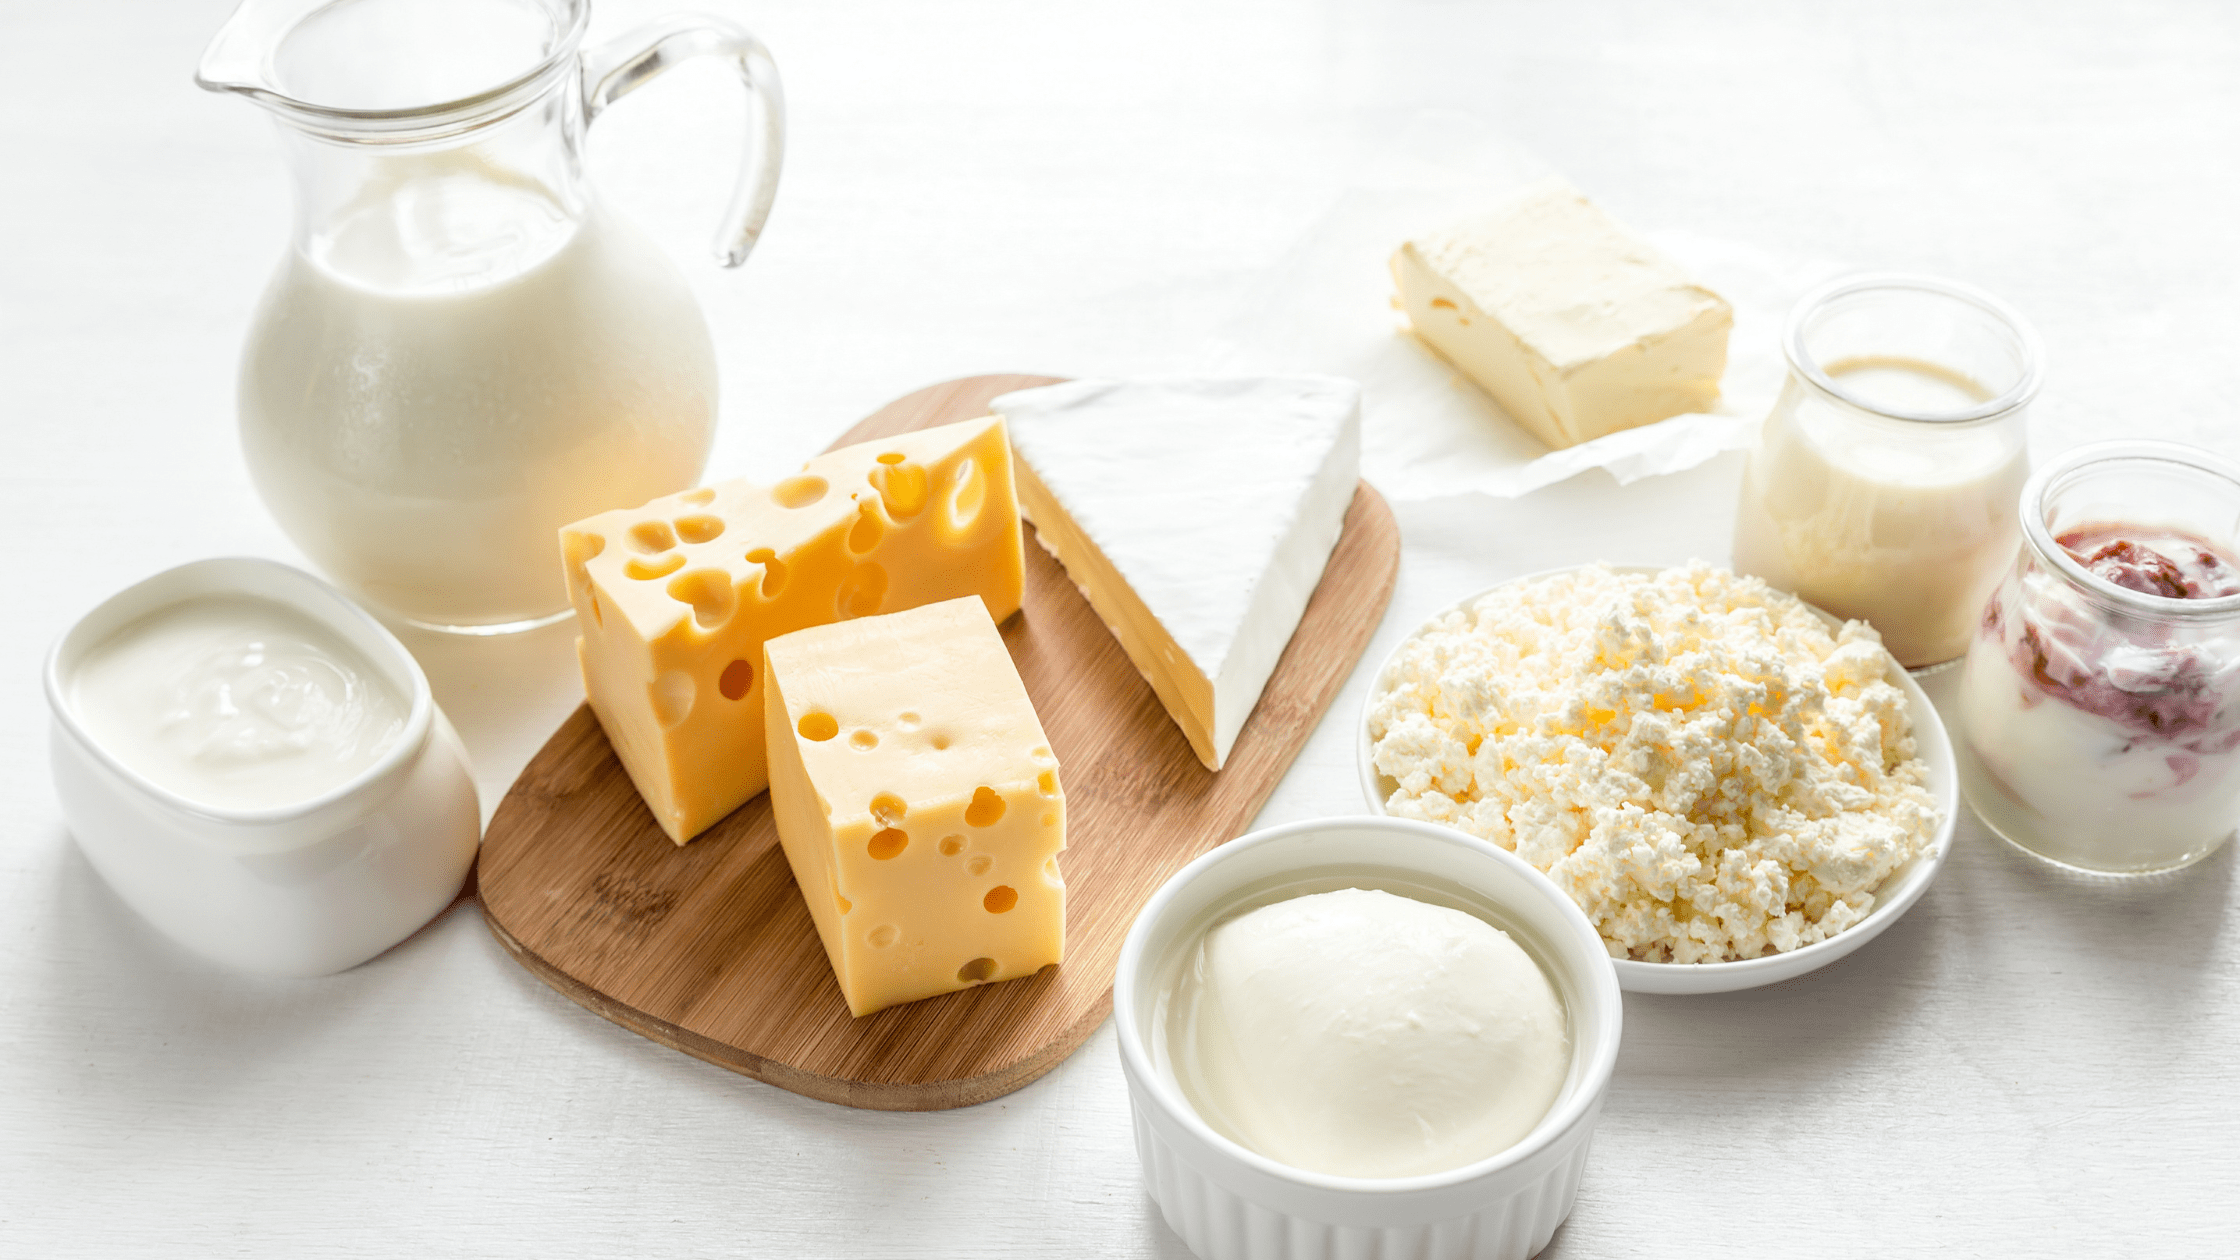 Various dairy products like milk and cheese